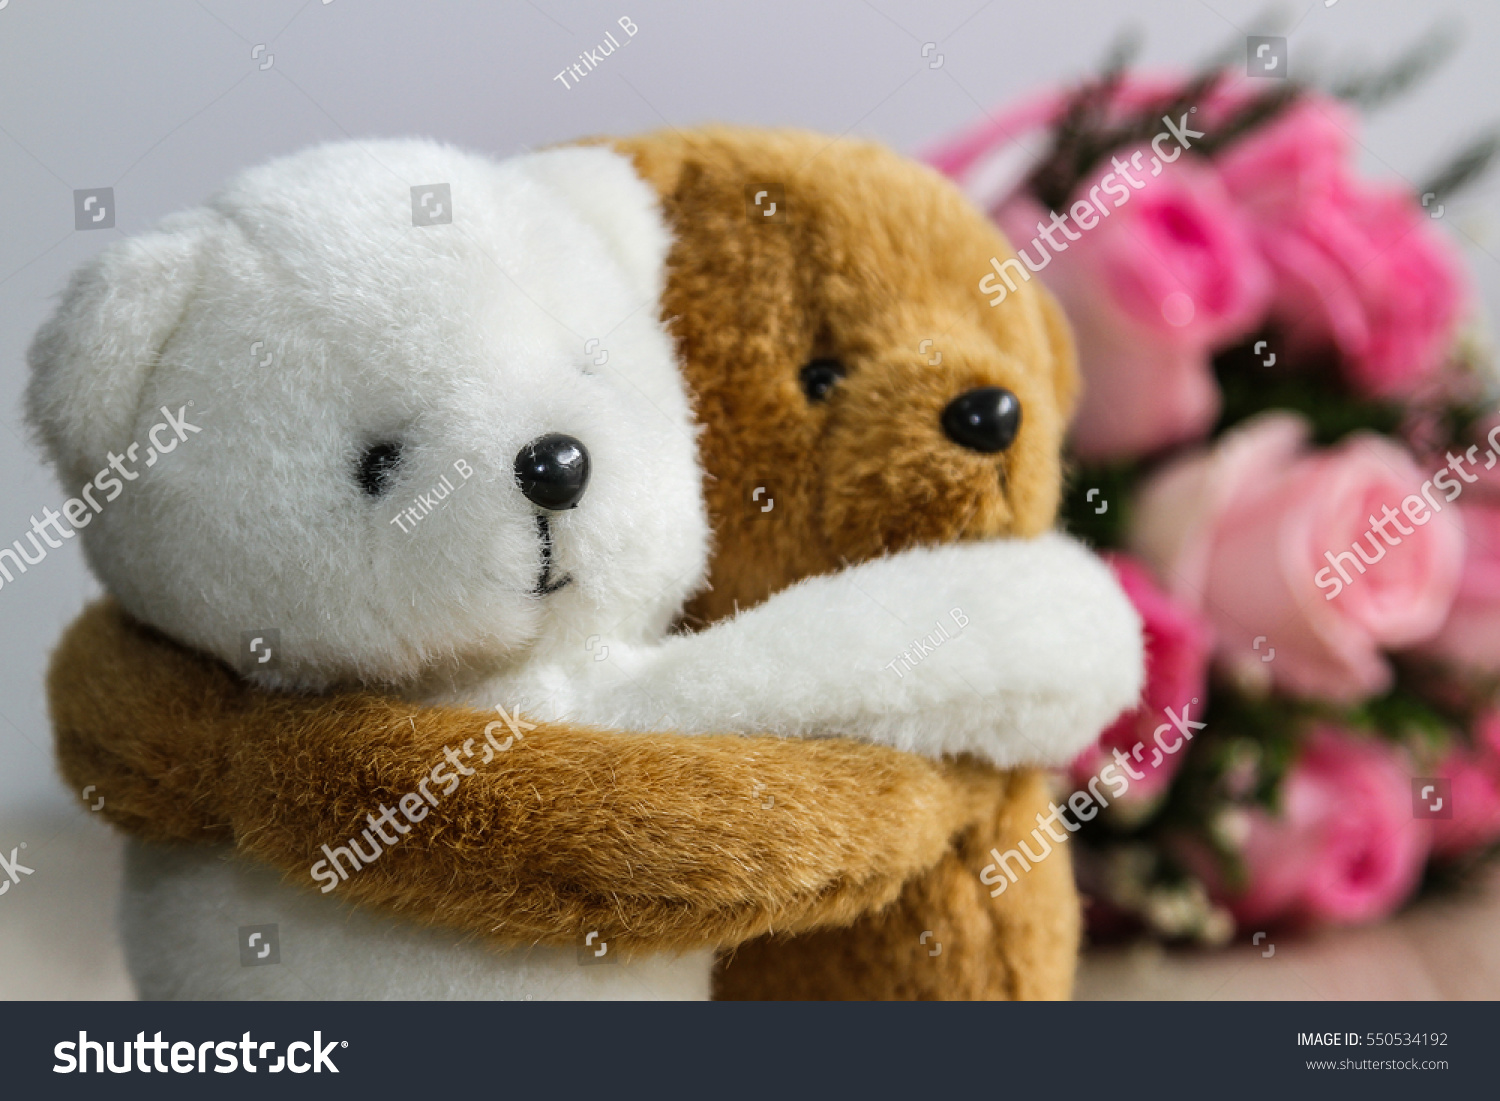 white and brown teddy bear